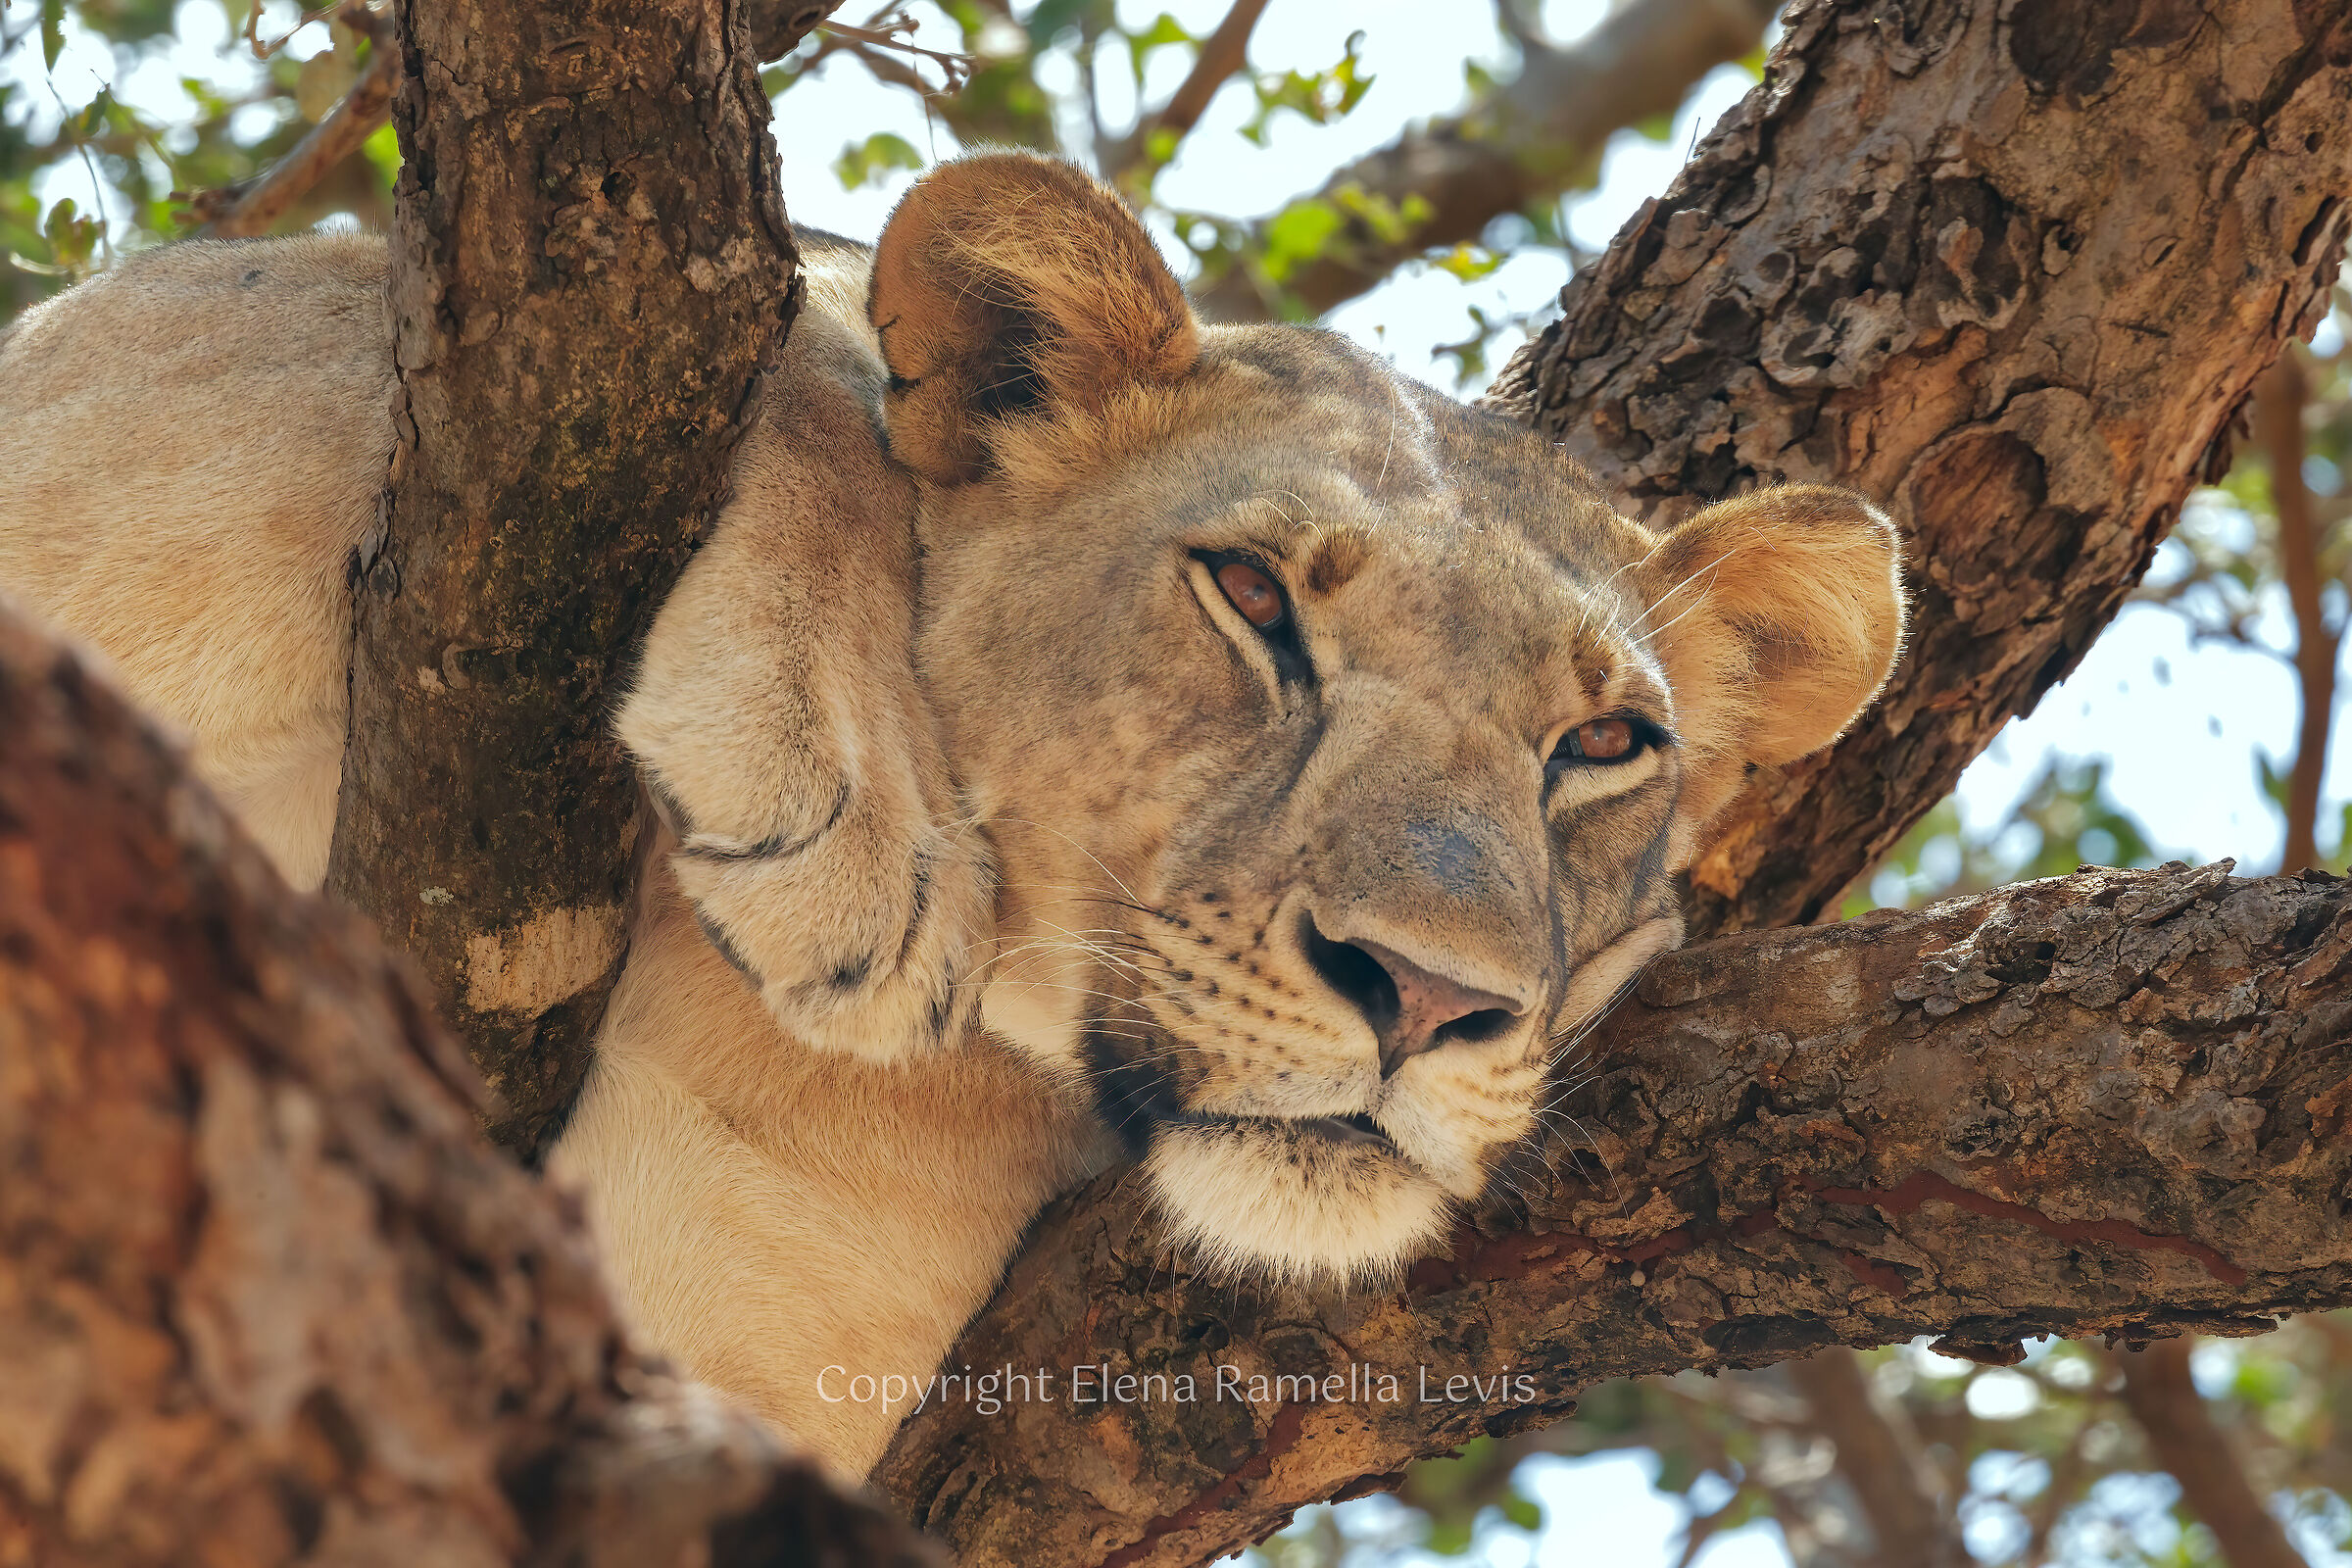 Snoozing on a tree......